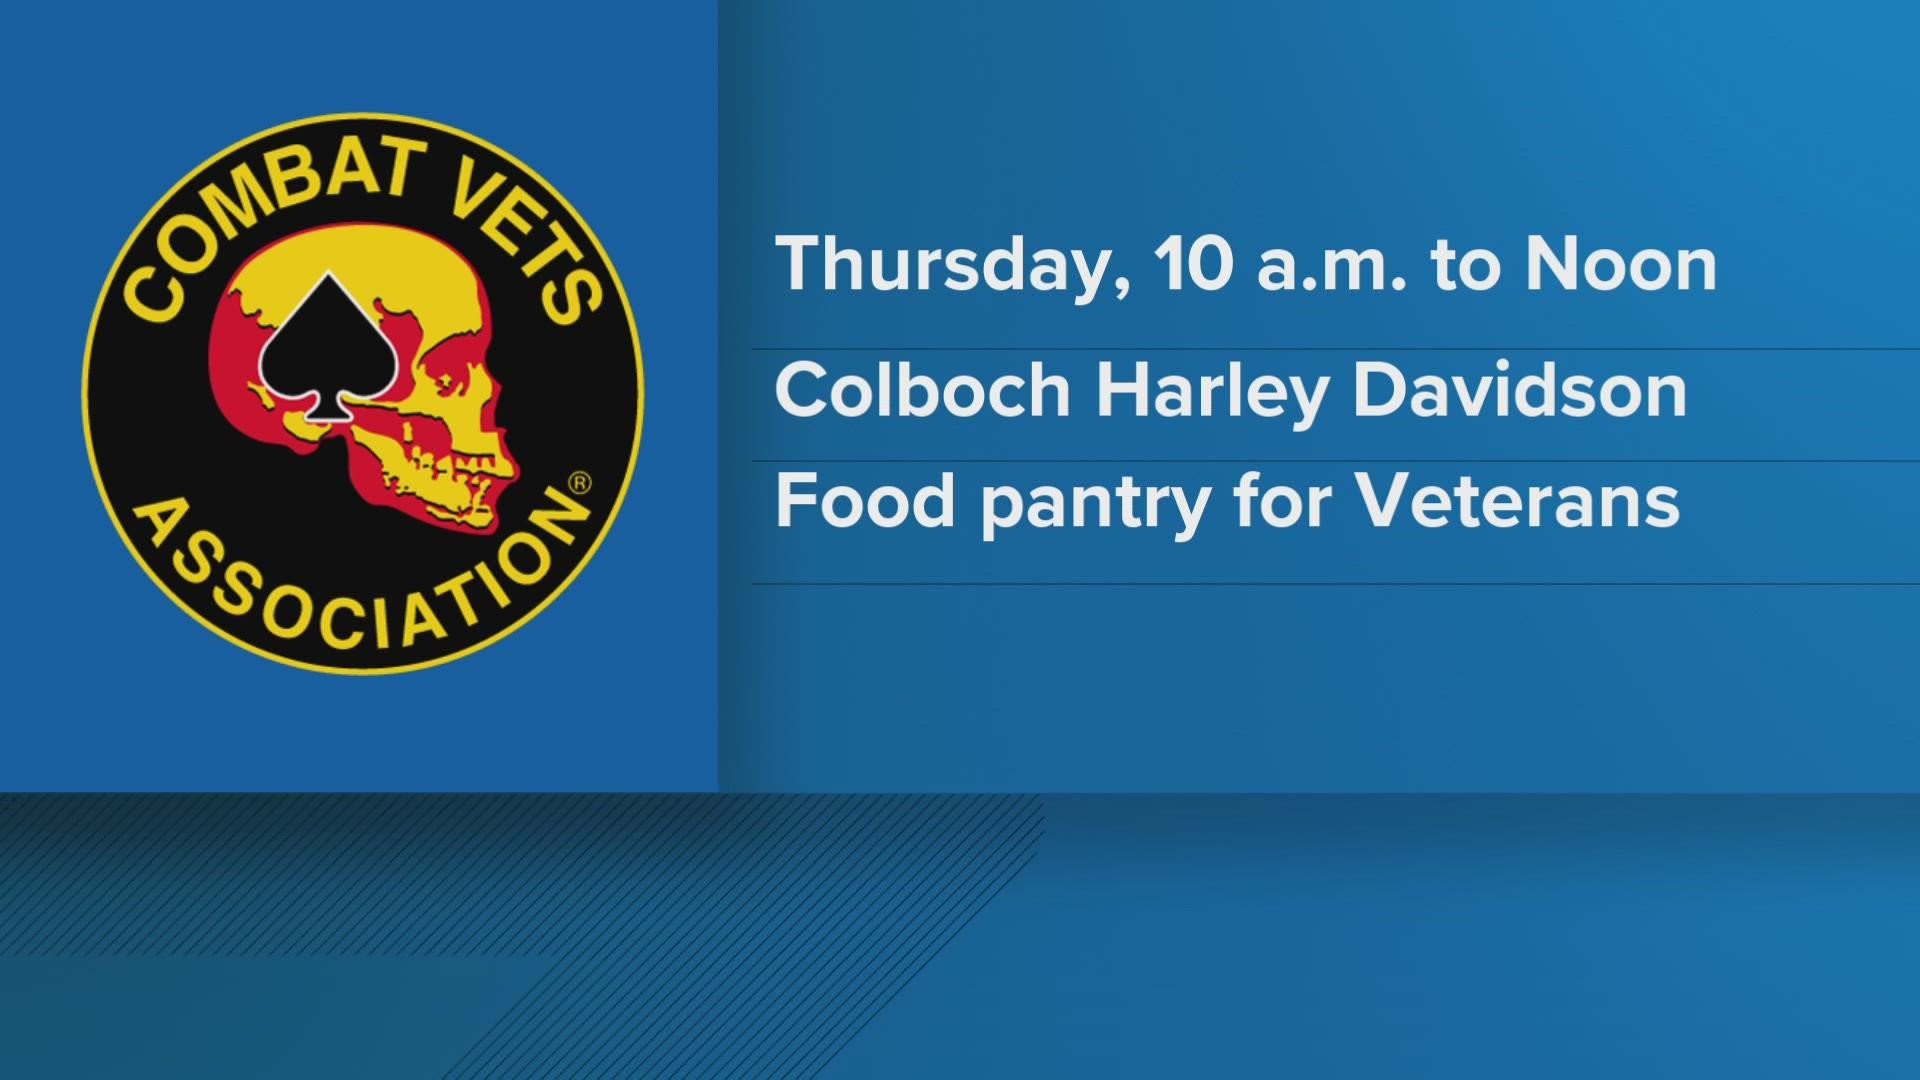 The Combat Veterans Motorcycle Association partnered with Second Harvest to distribute food to the nation's heroes on Thursday from 10 a.m. to noon.